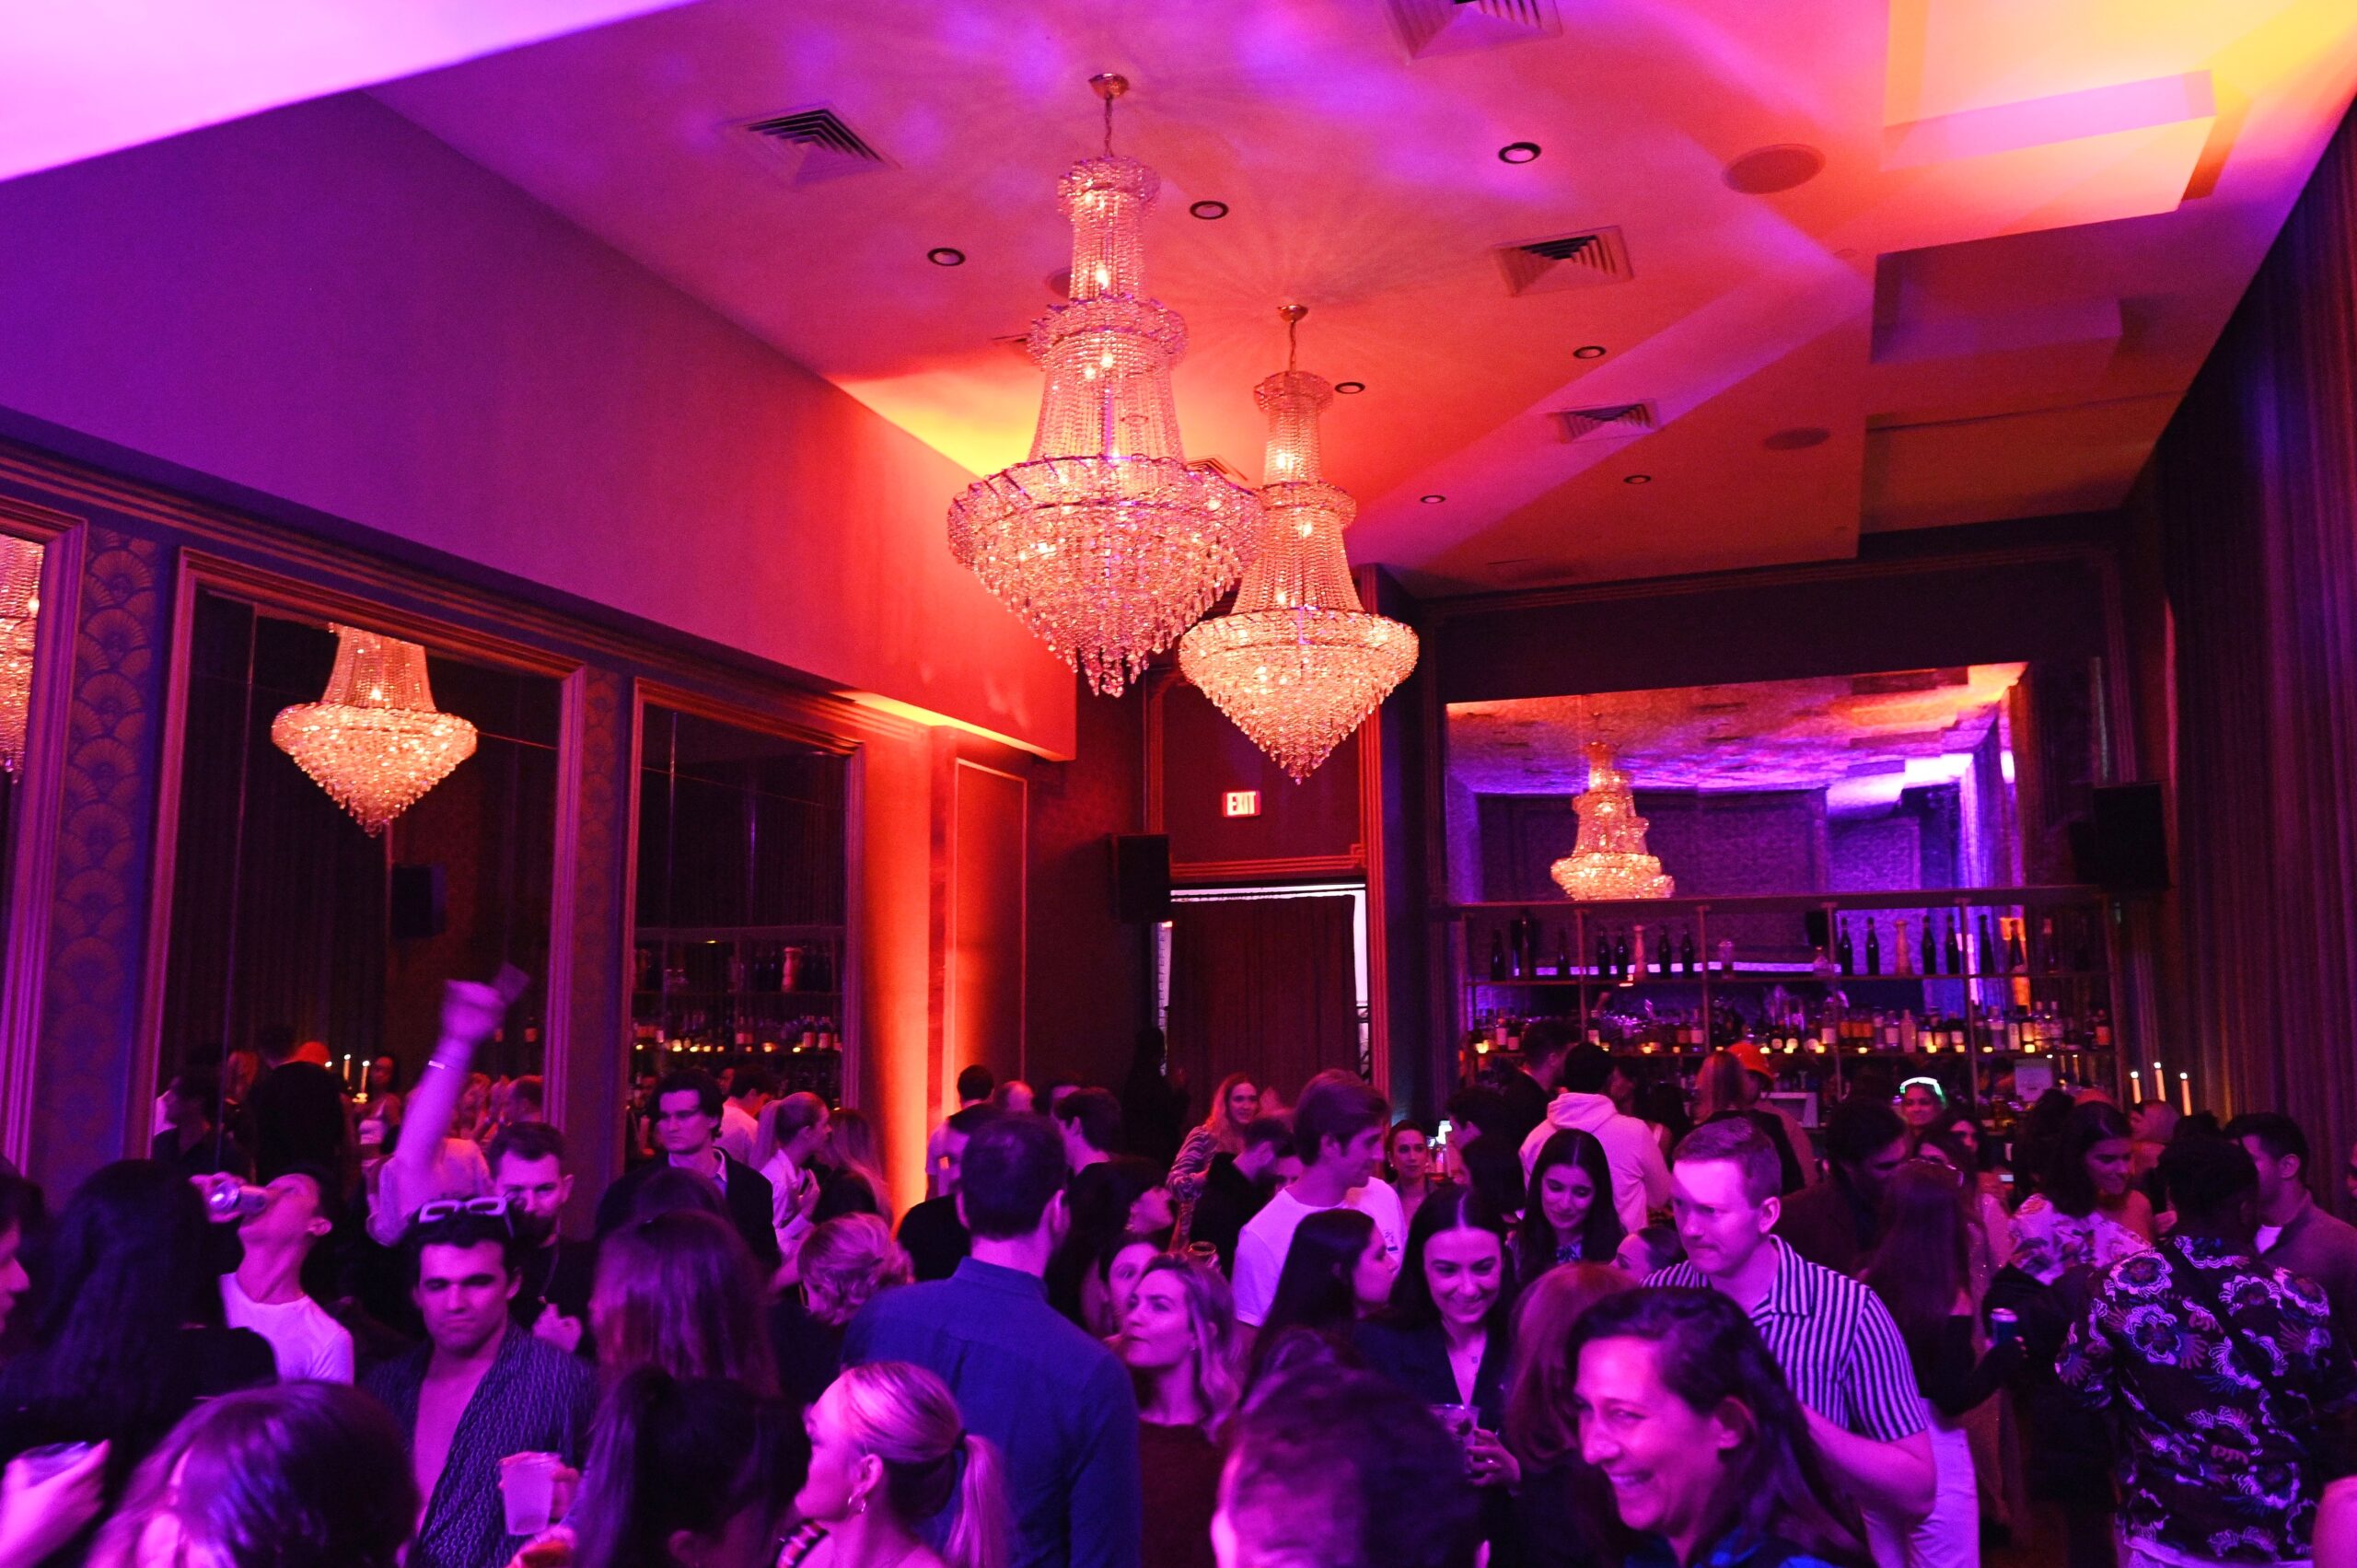 A lively crowd of people mingling and dancing in a dimly lit room with luxurious chandeliers and purple lighting.